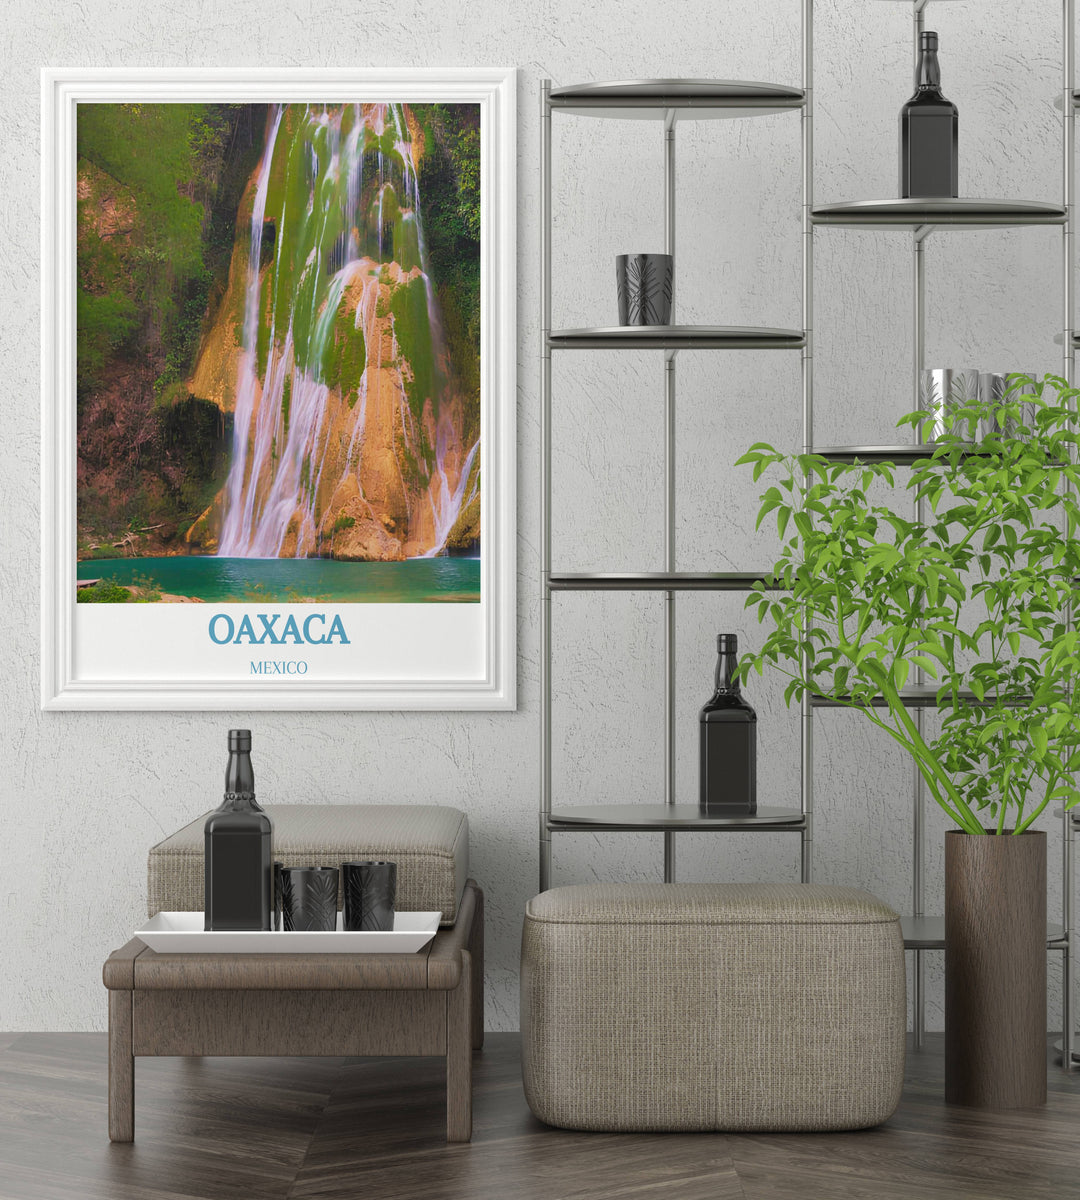 Hierve el Agua gallery wall art that brings the outdoors inside with its depiction of Oaxacas petrified waterfall landscapes.